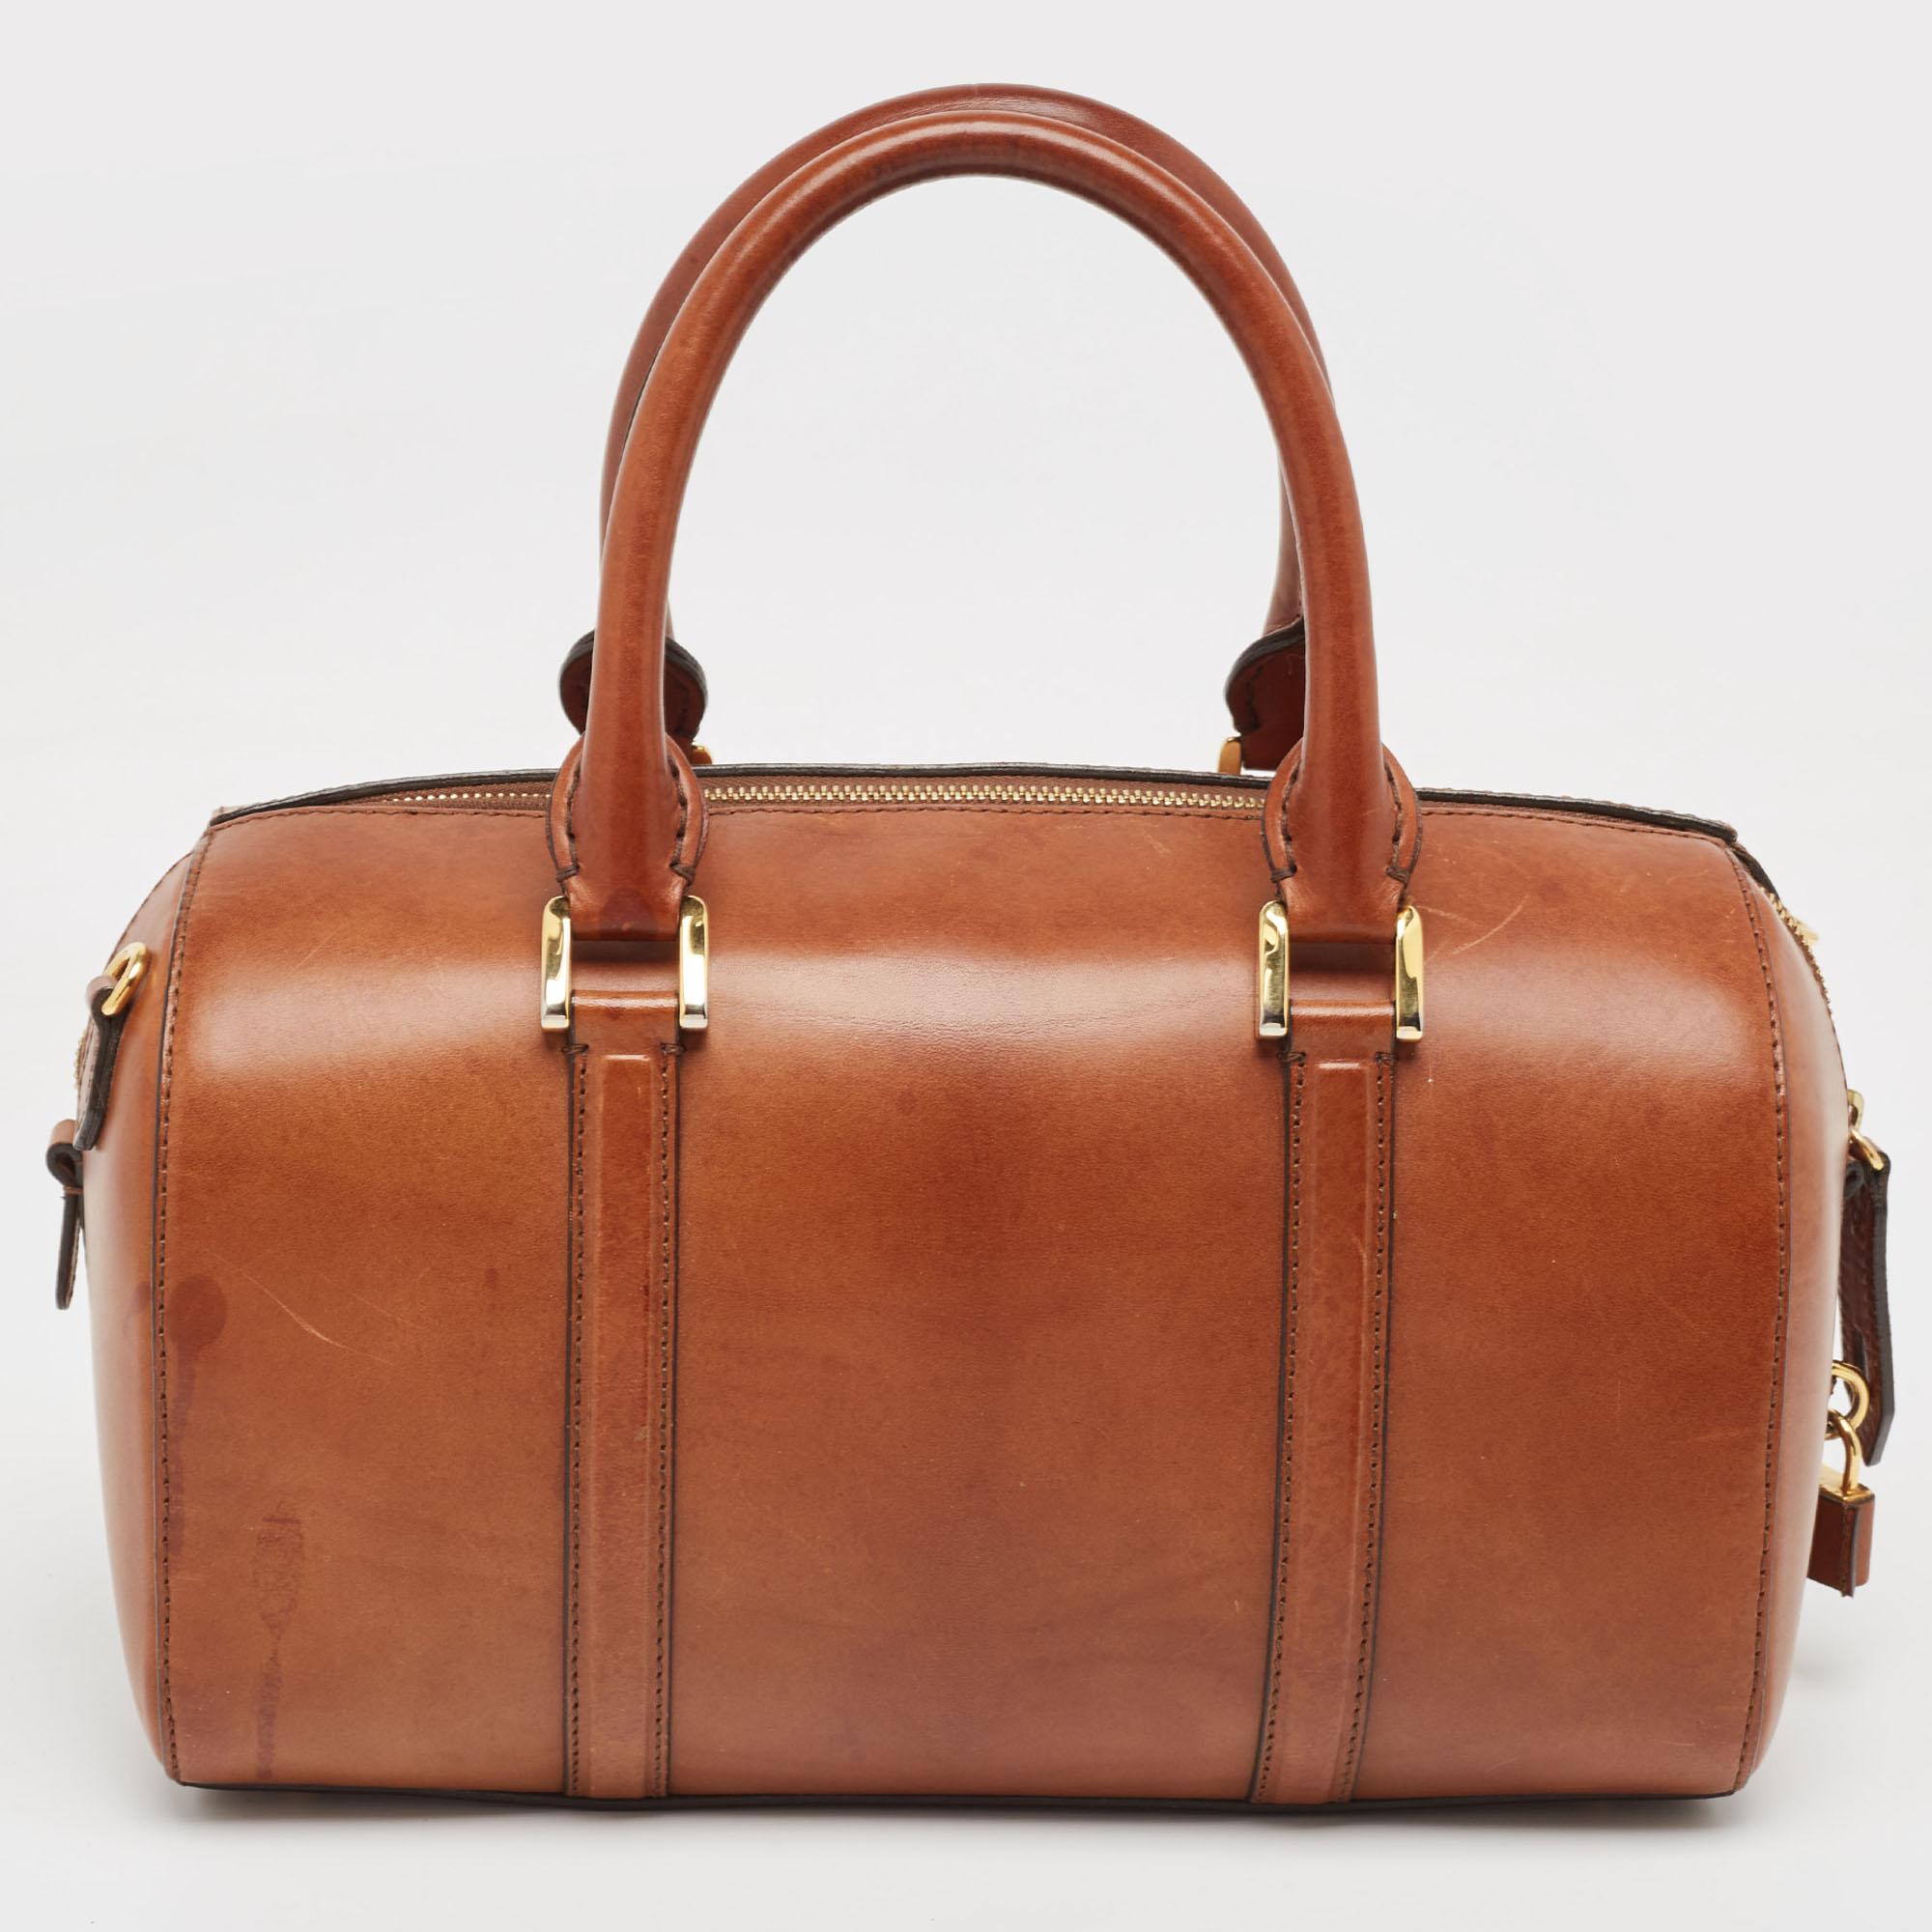 A stunning blend of elegance and luxury, this Burberry bag is an instant classic. Ideal for your daily use, this barrel-shaped bag has dual handles for easy carrying option. The gold-tone hardware perfectly complements this sleek creation.

